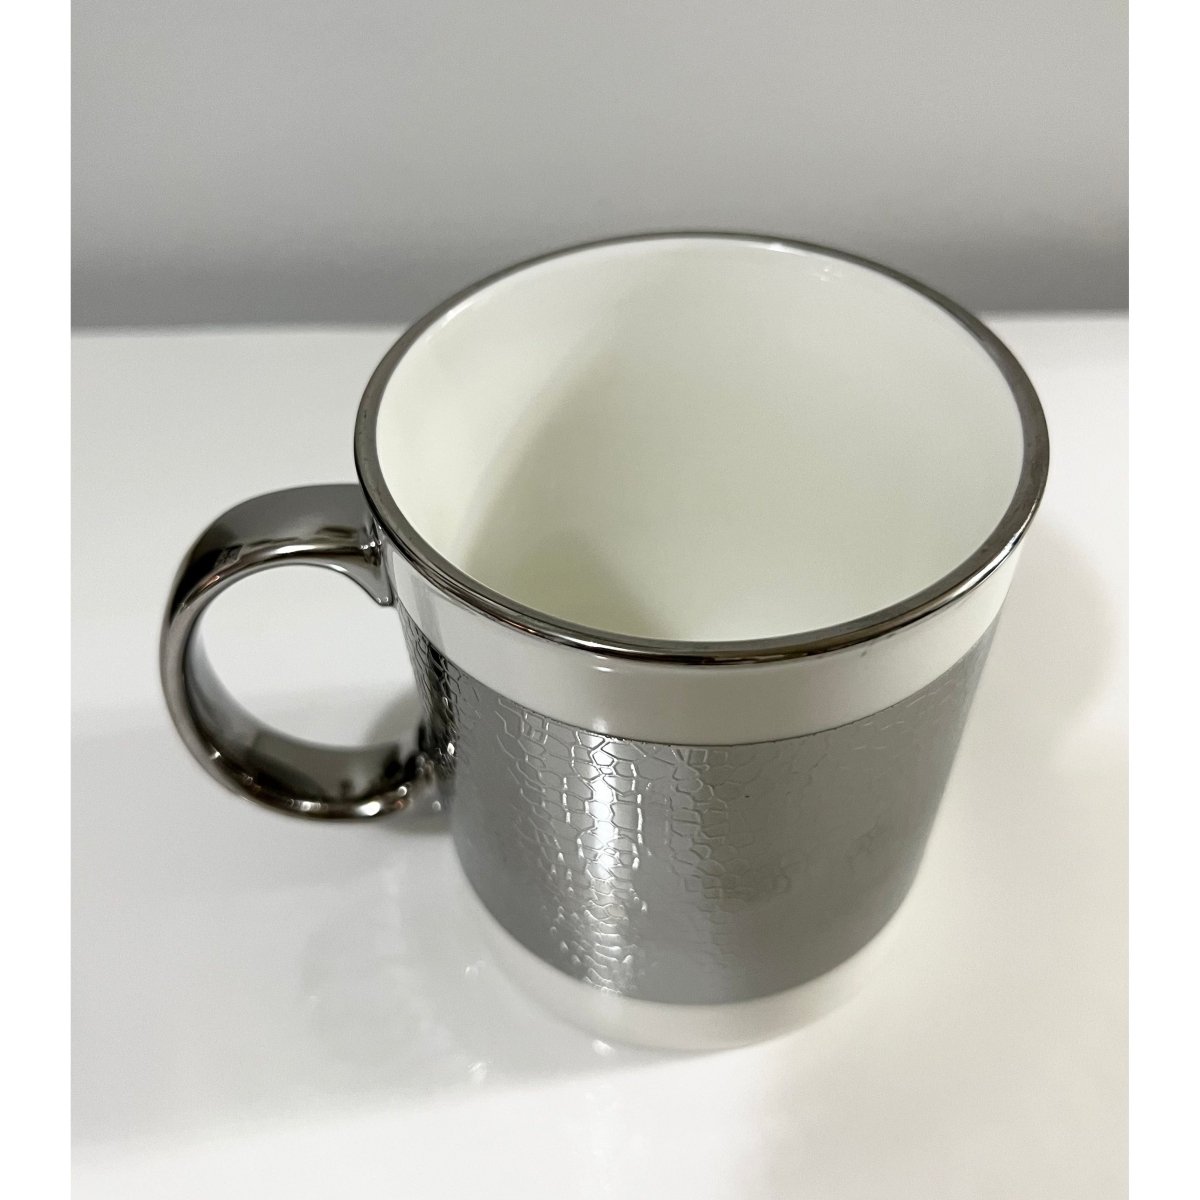 Highly Aesthetic Coffee Mug, Perfect For Capturing Stunning Photos. Silver  Trim With Trendy Color Combination, Exuding Luxury, Exquisite Ceramic,  Large Capacity. Ideal Gift For Lady, Suitable For Office And Home Use 